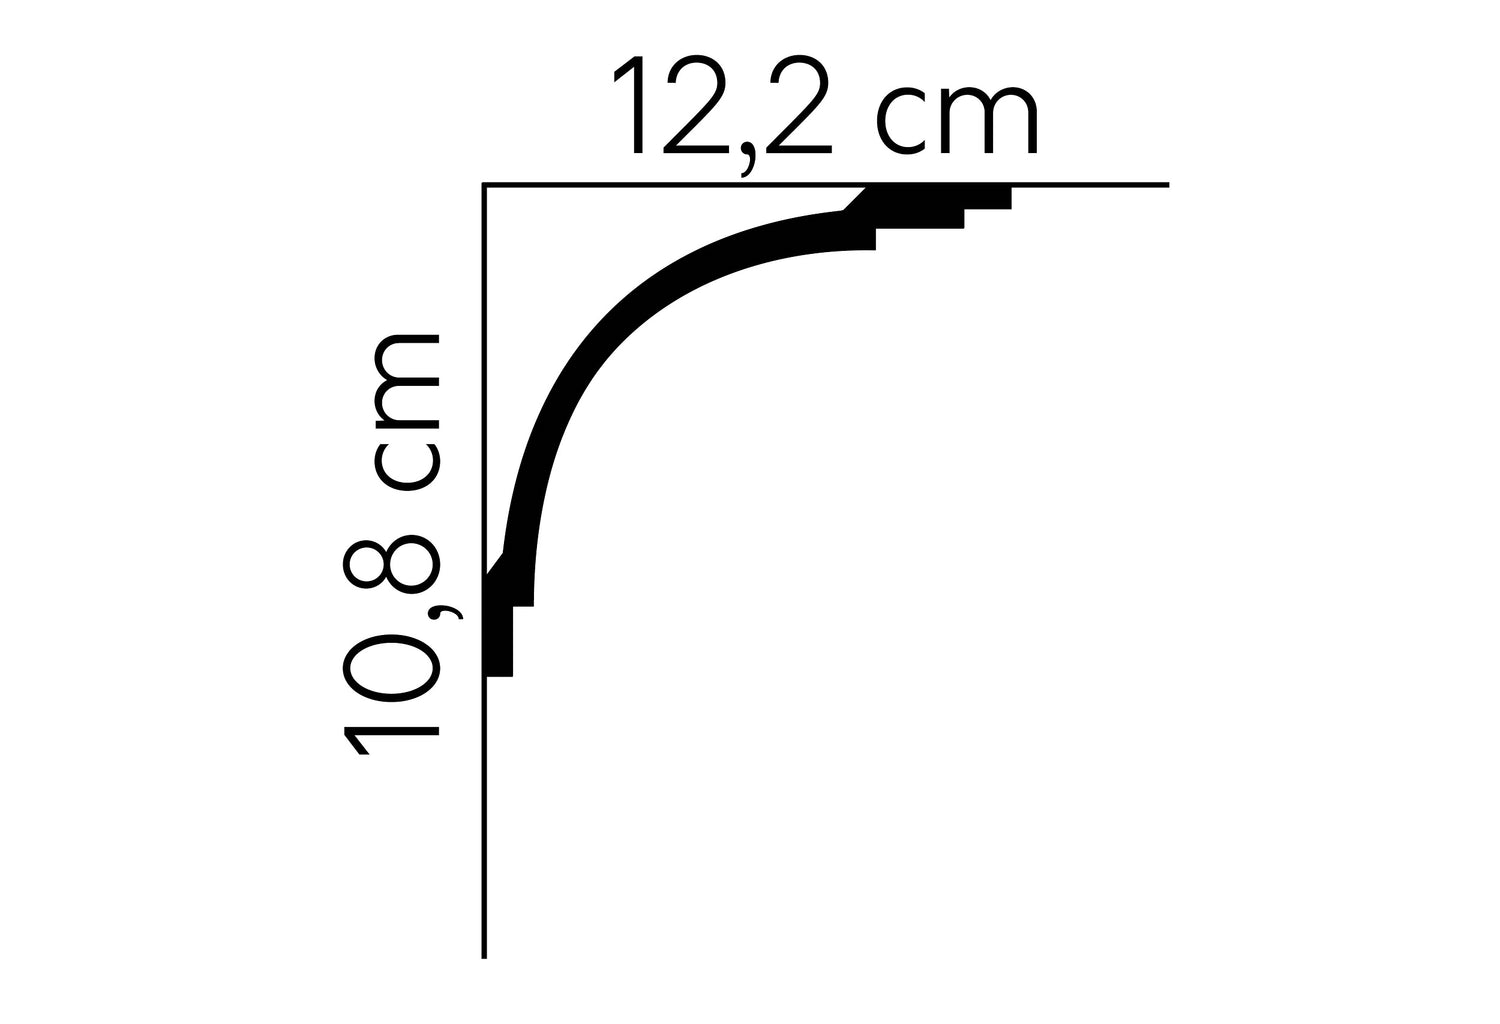 Graphic showing MD105 Coving - Lightweight Coving's 10.8cm height and 12.2cm depth